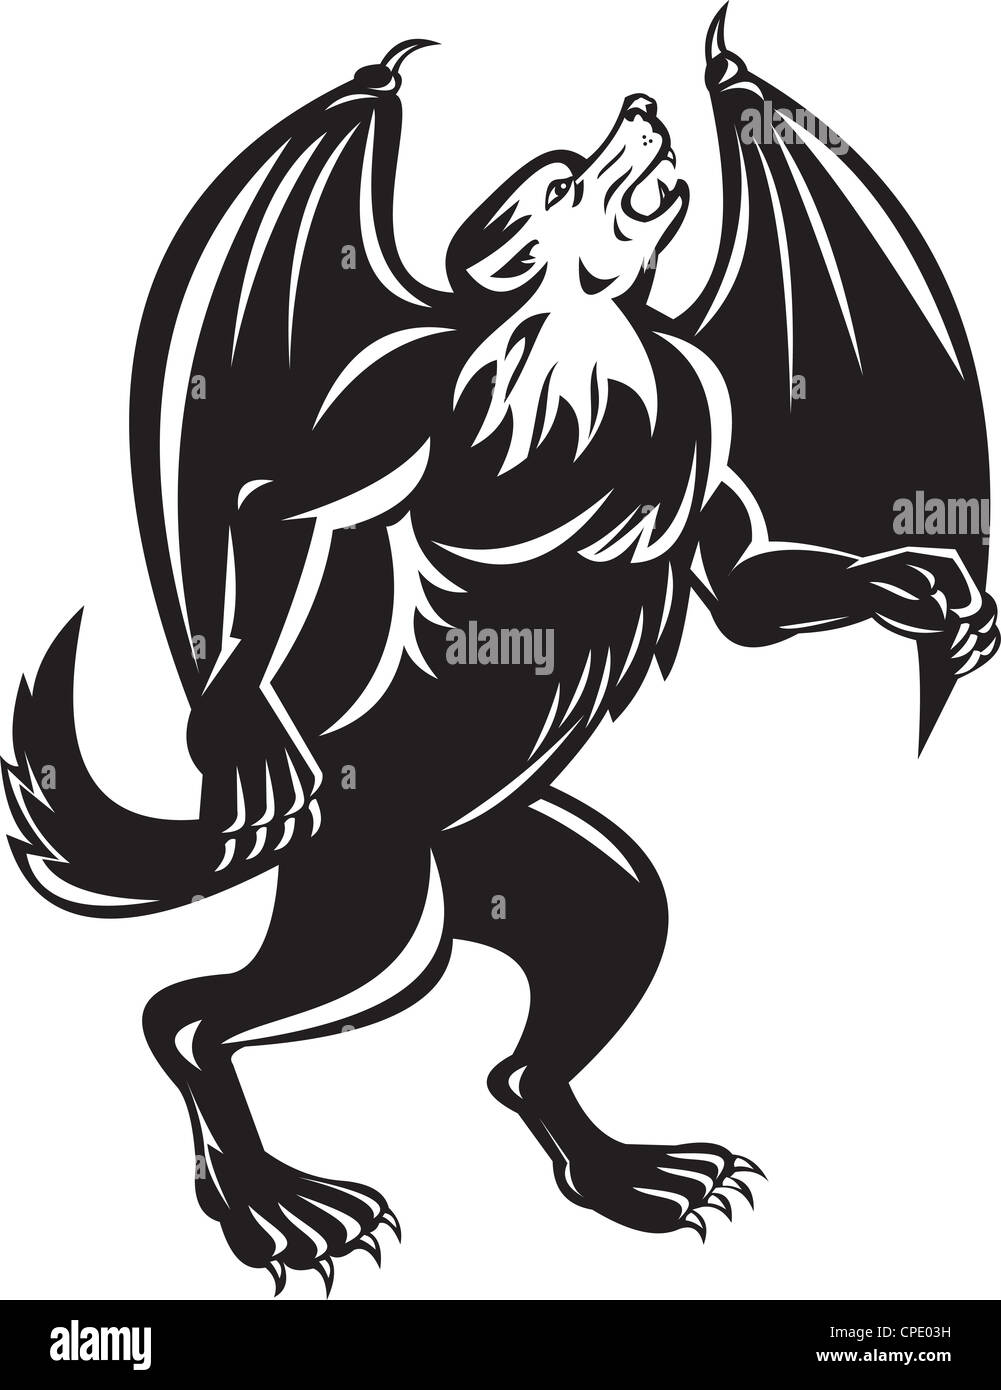 Illustration of a Kludde, a mythical Belgian beast that is a large black dog, with bat like wings and walks upright on it’s hind legs facing side done in black and white on isolated white background. Stock Photo